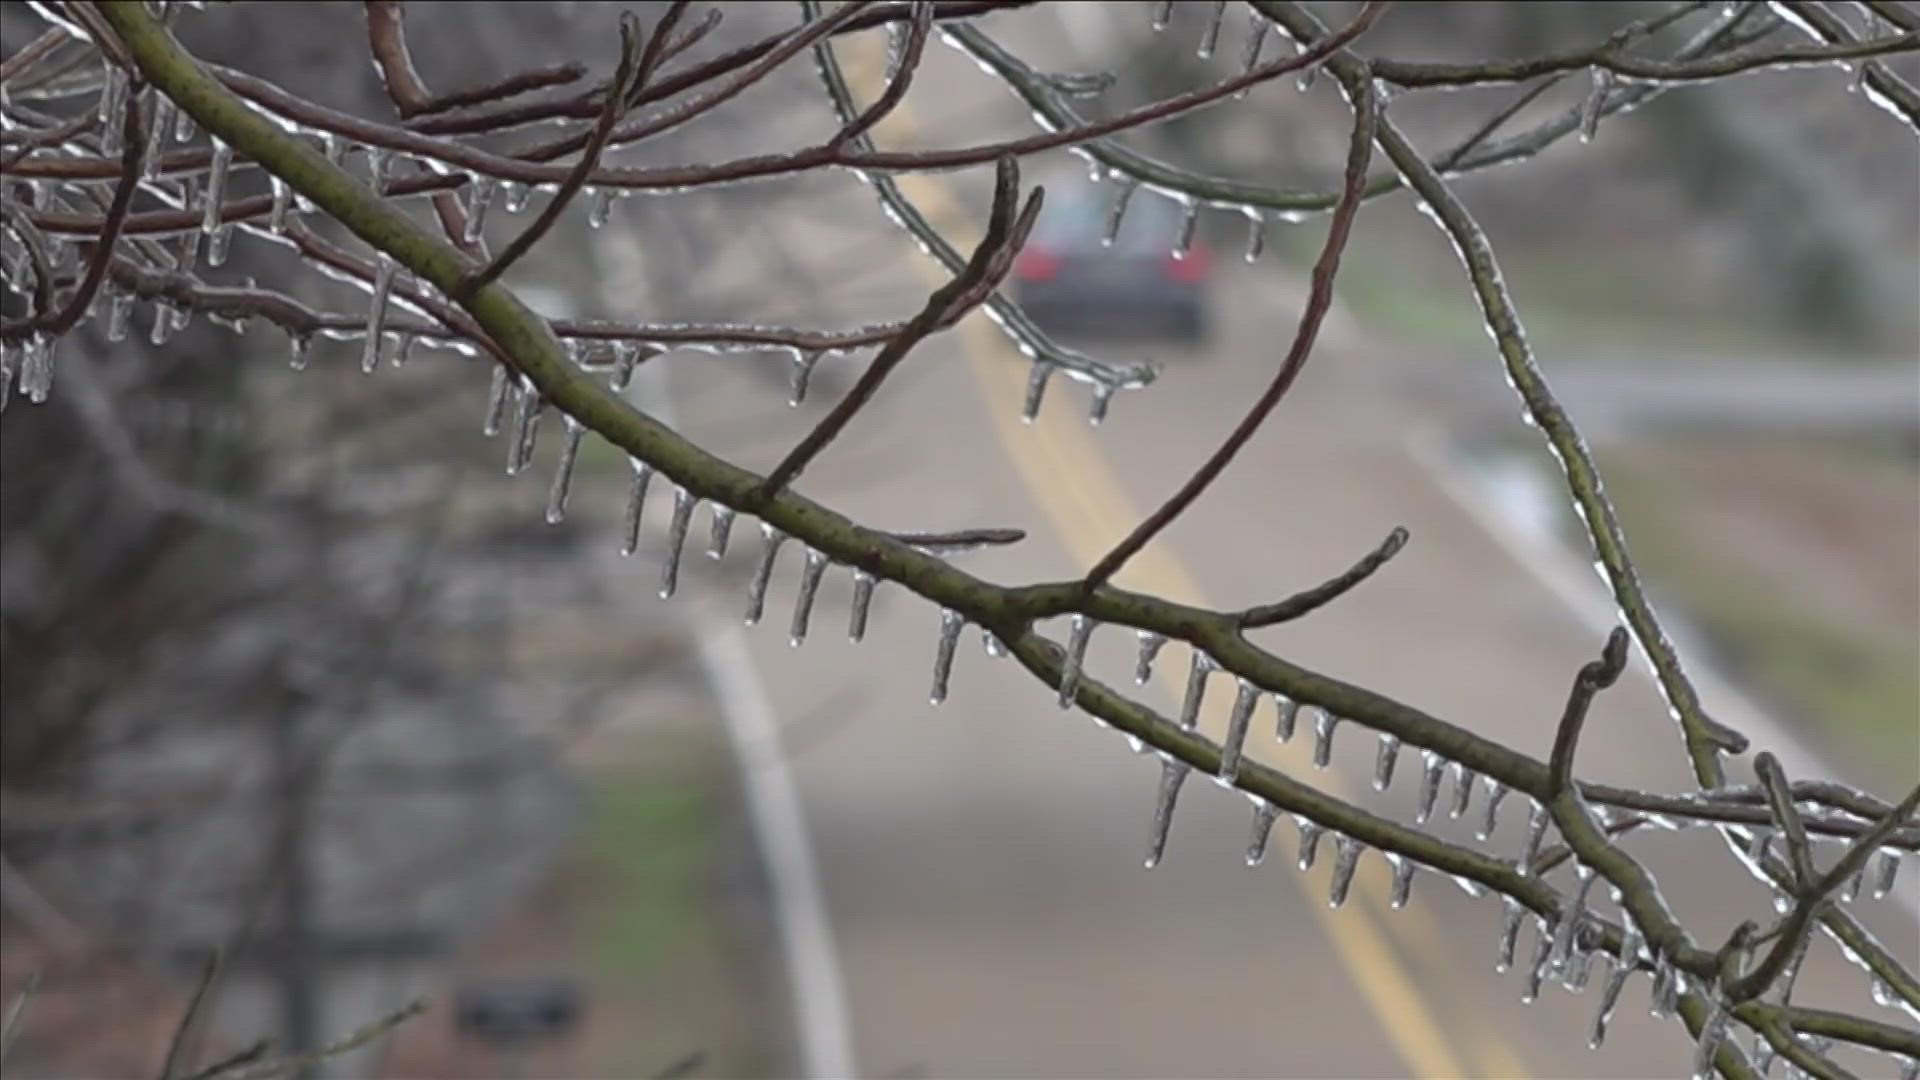 With rain and freezing conditions, road conditions were slick on Tuesday.